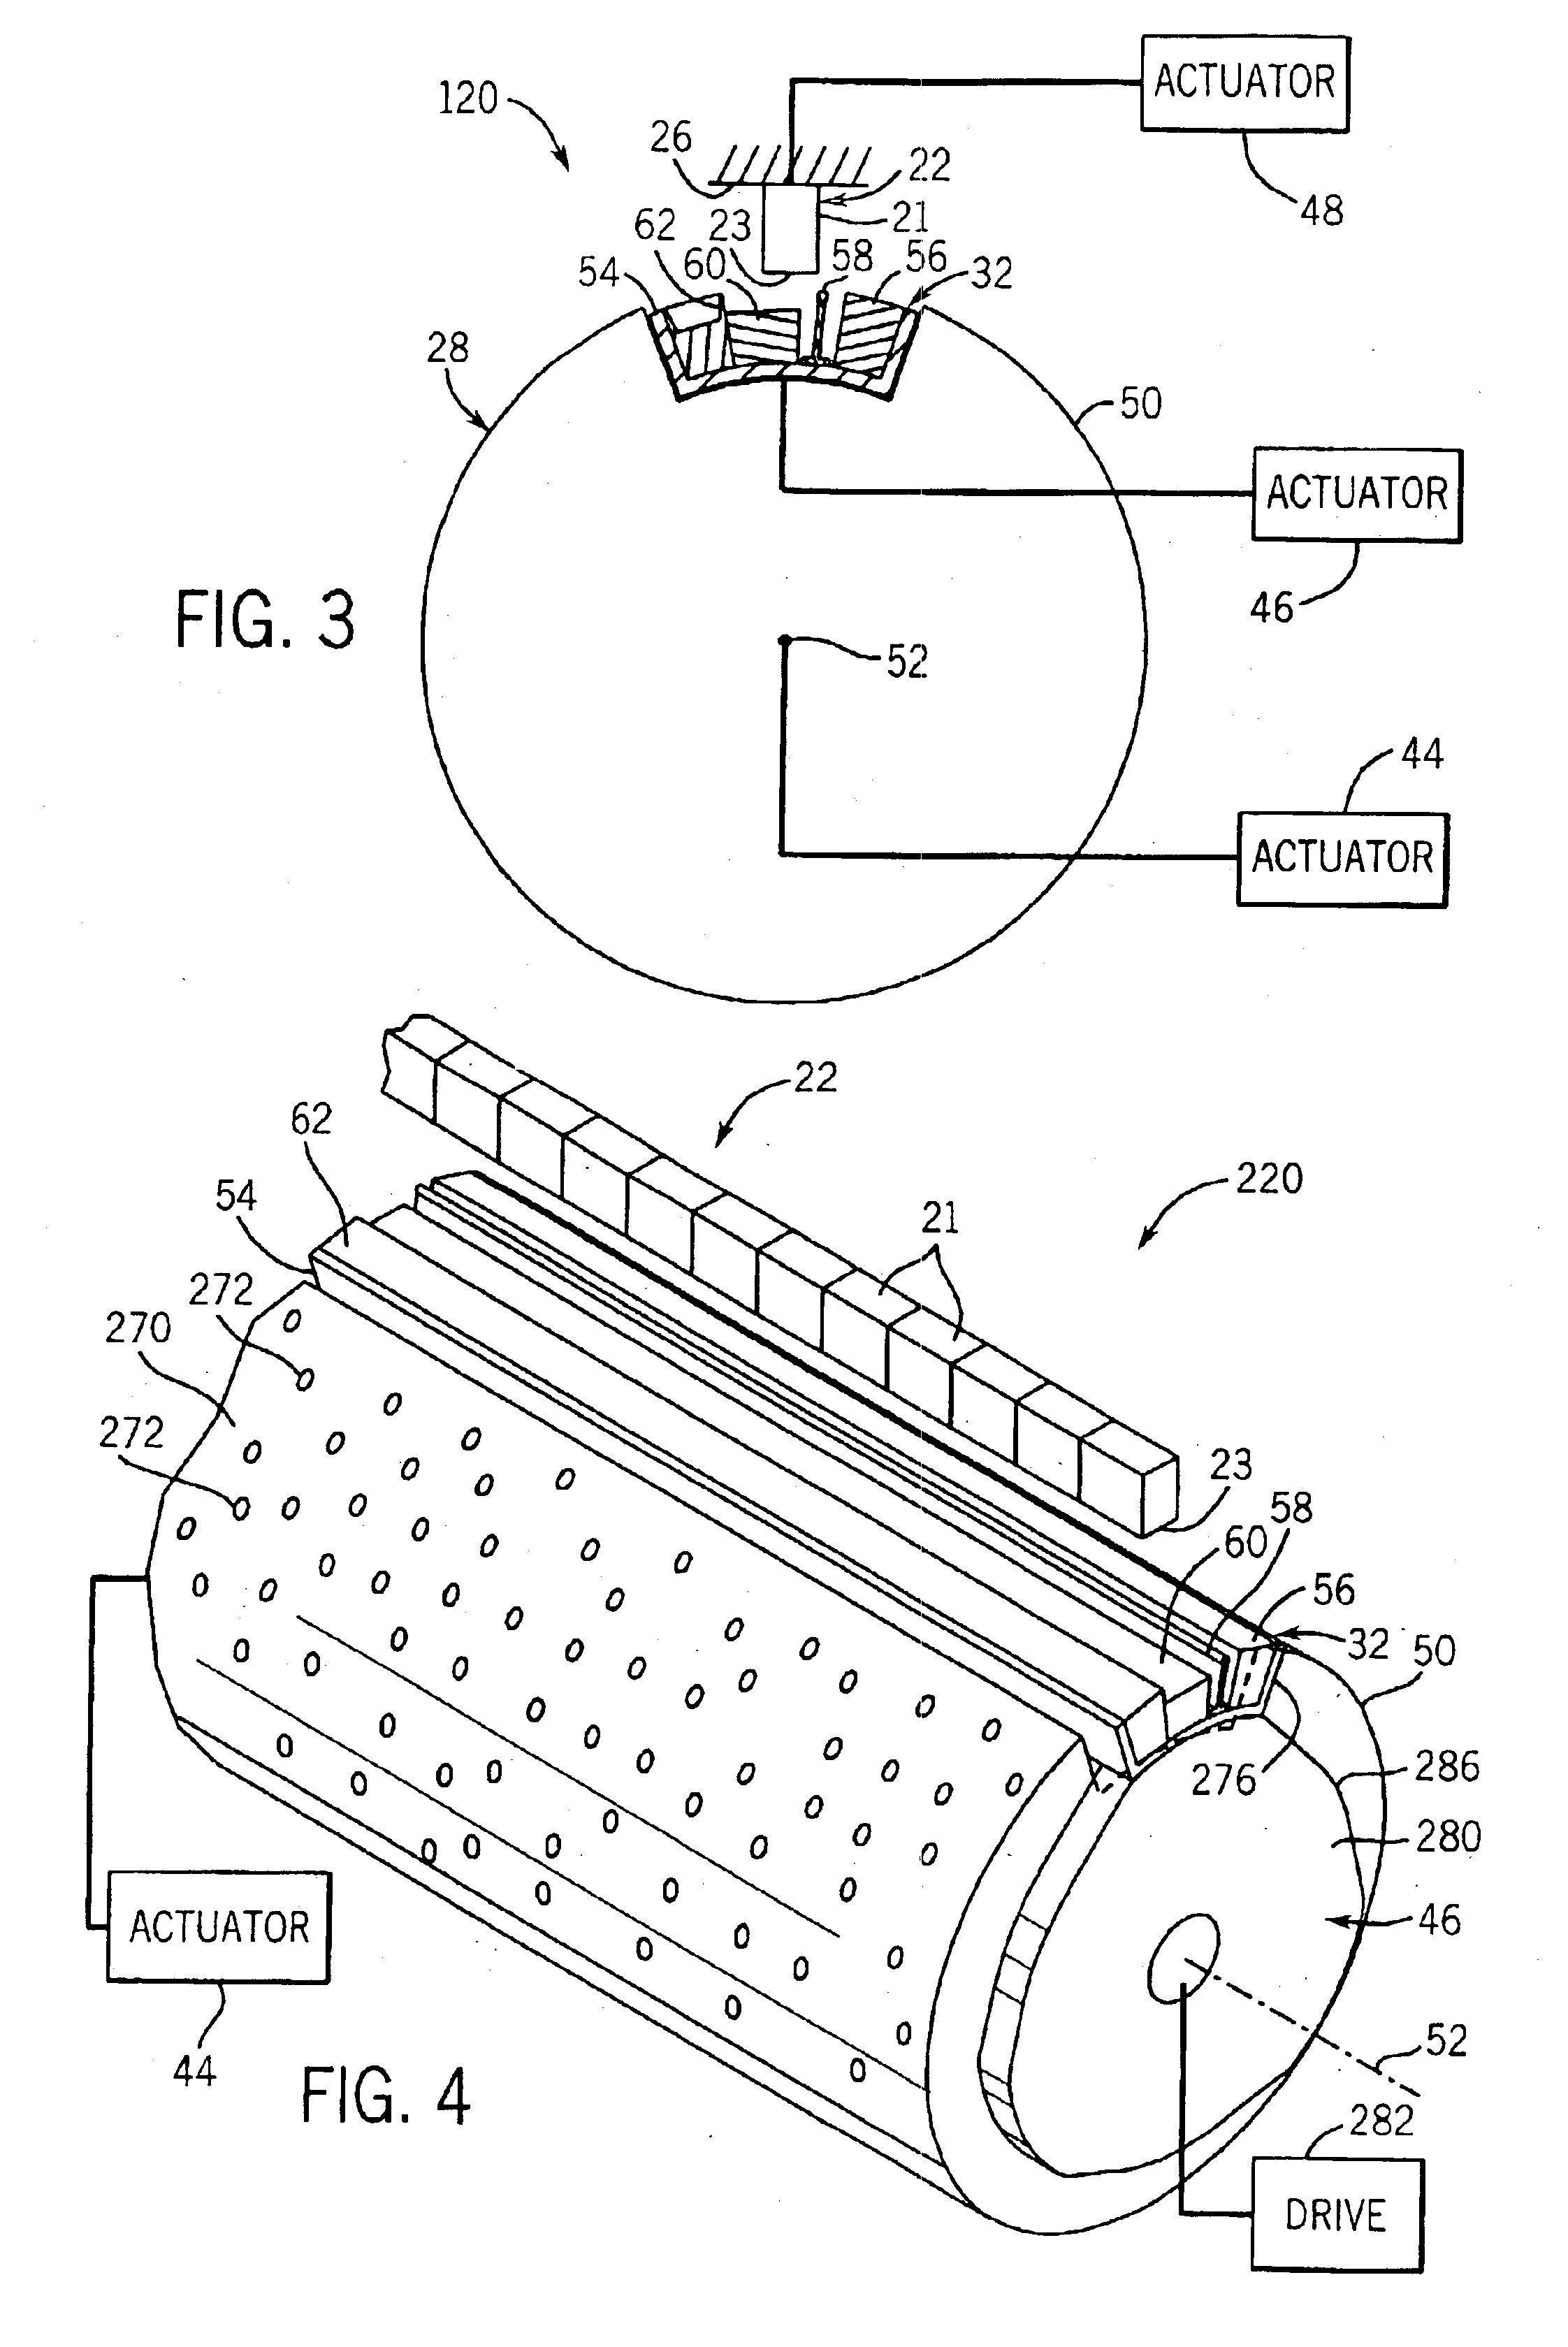 Printer servicing system and method